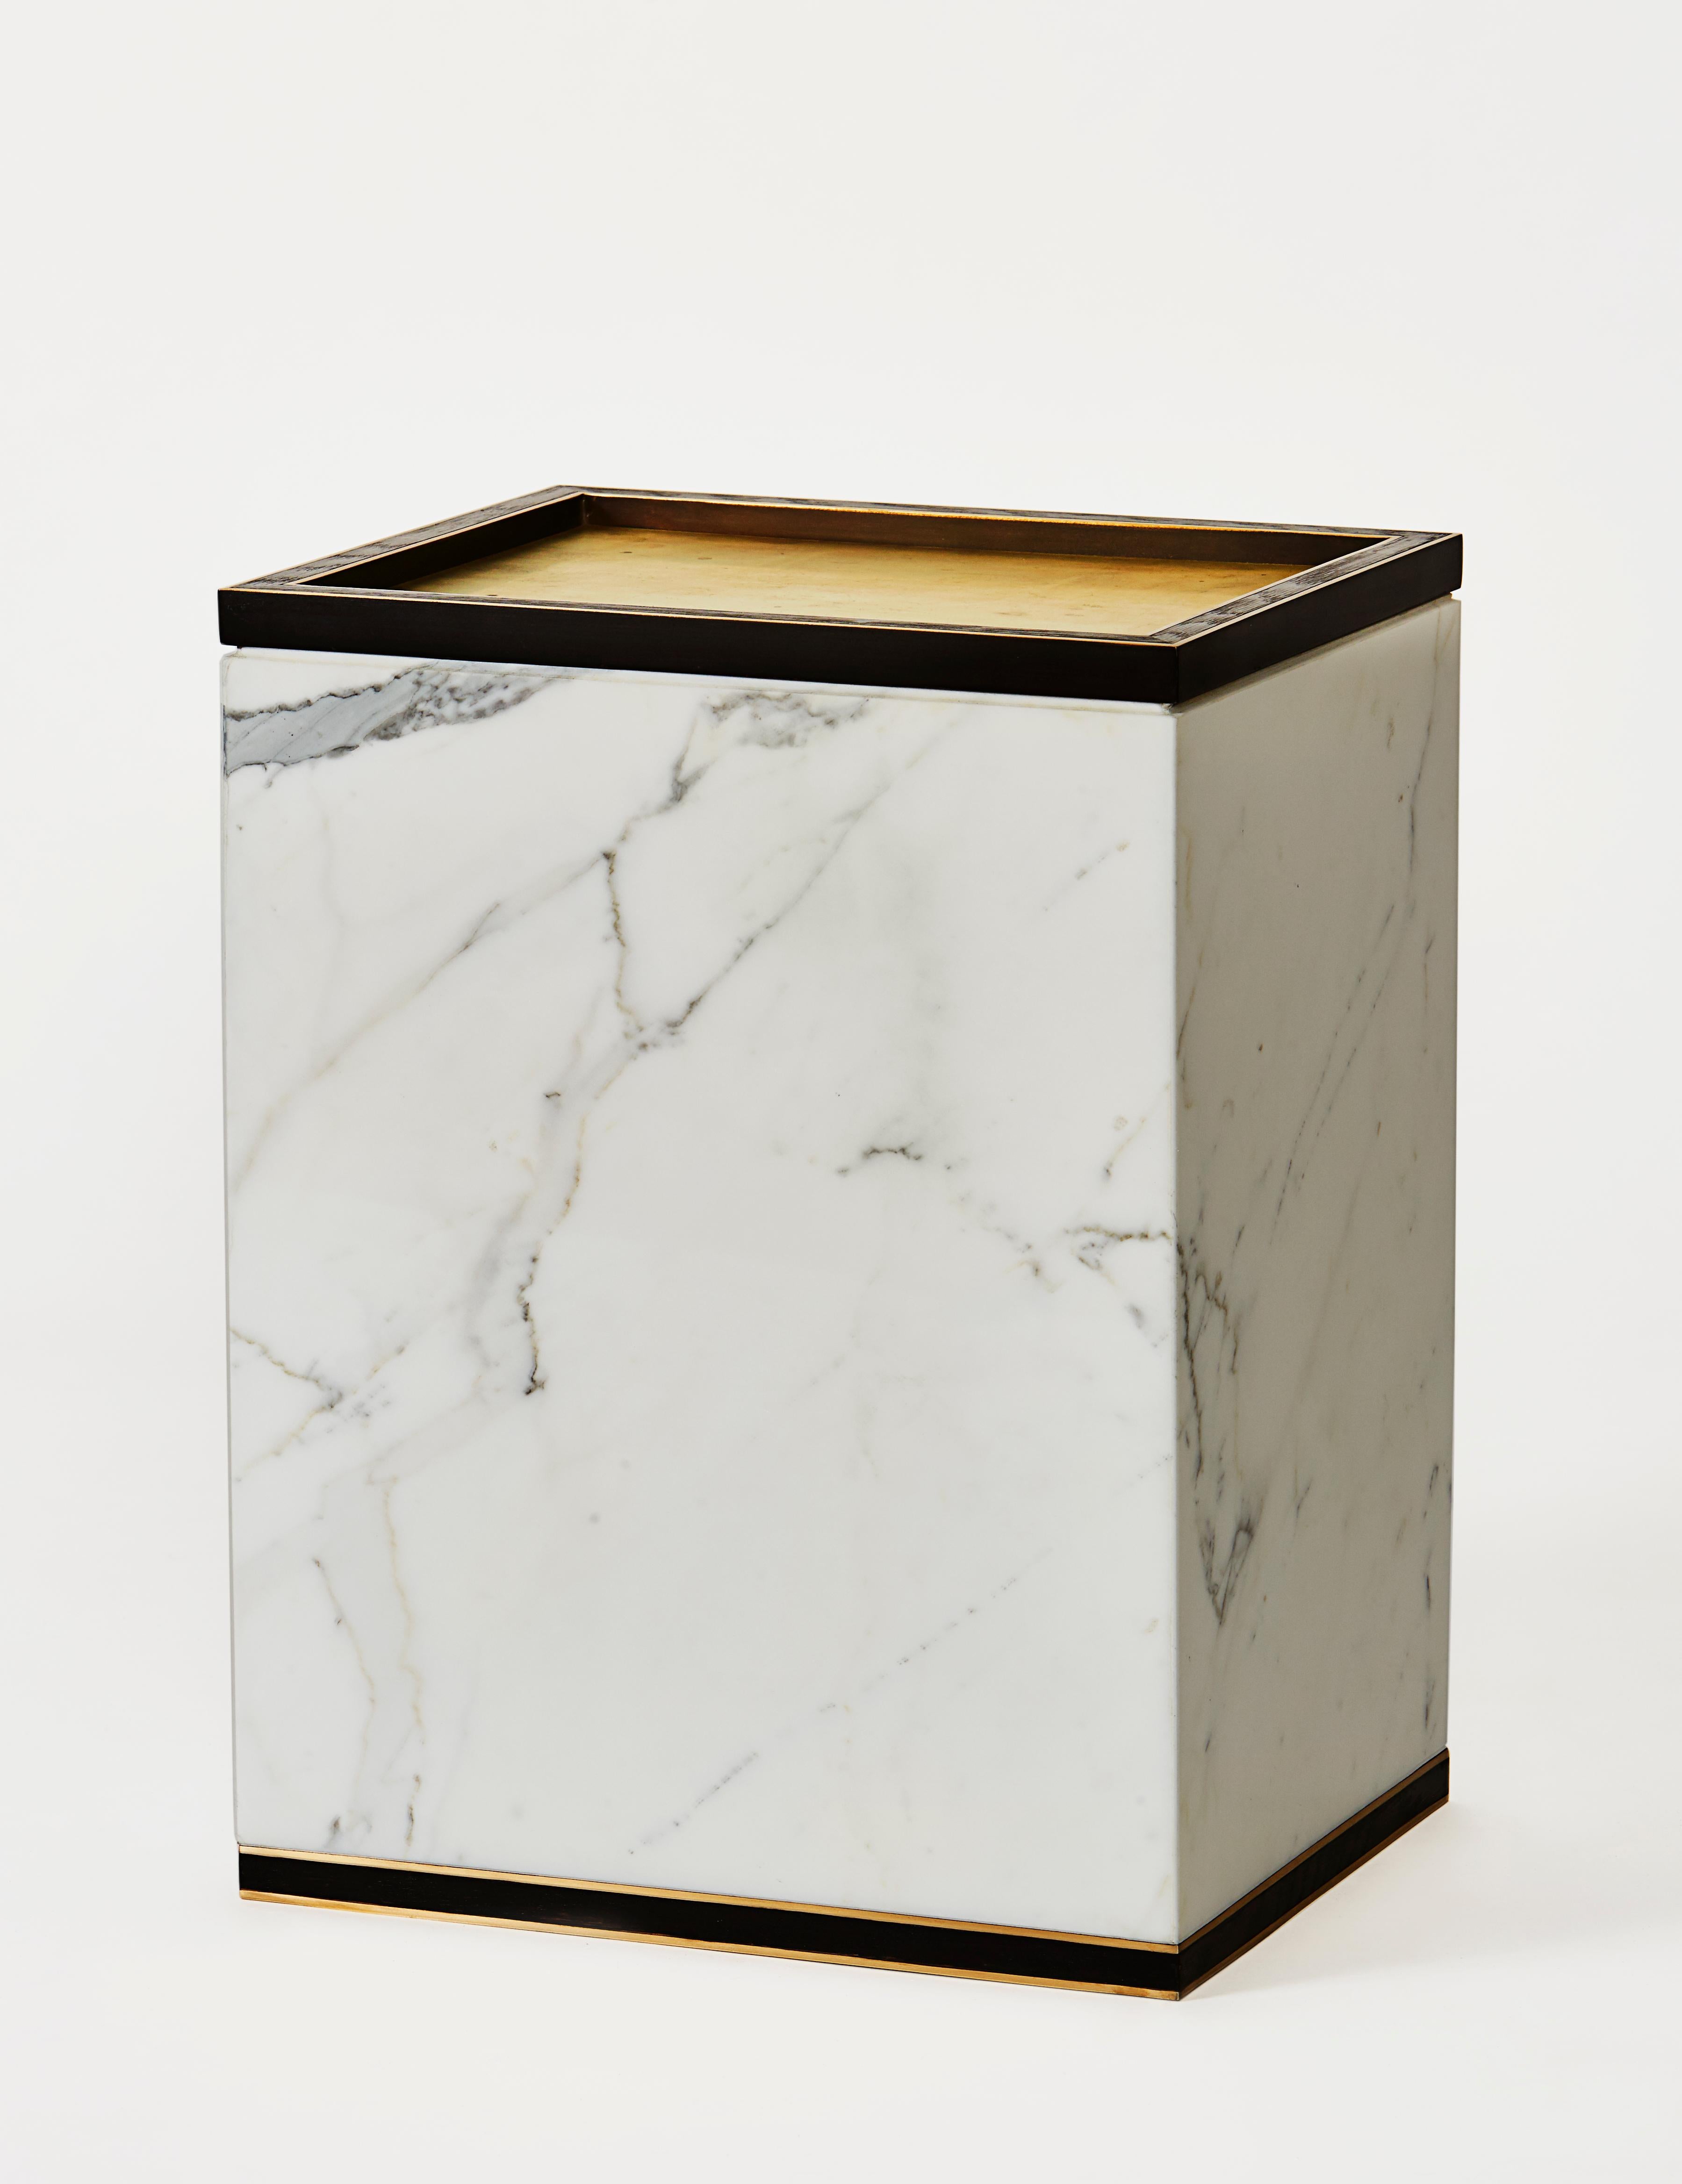 Medici table in brass, oak and marble by Cam Crockford 

Materials: Brass, oak, and marble
Dimensions: 10.5 W x 13.5 D x 17.5 H inches.